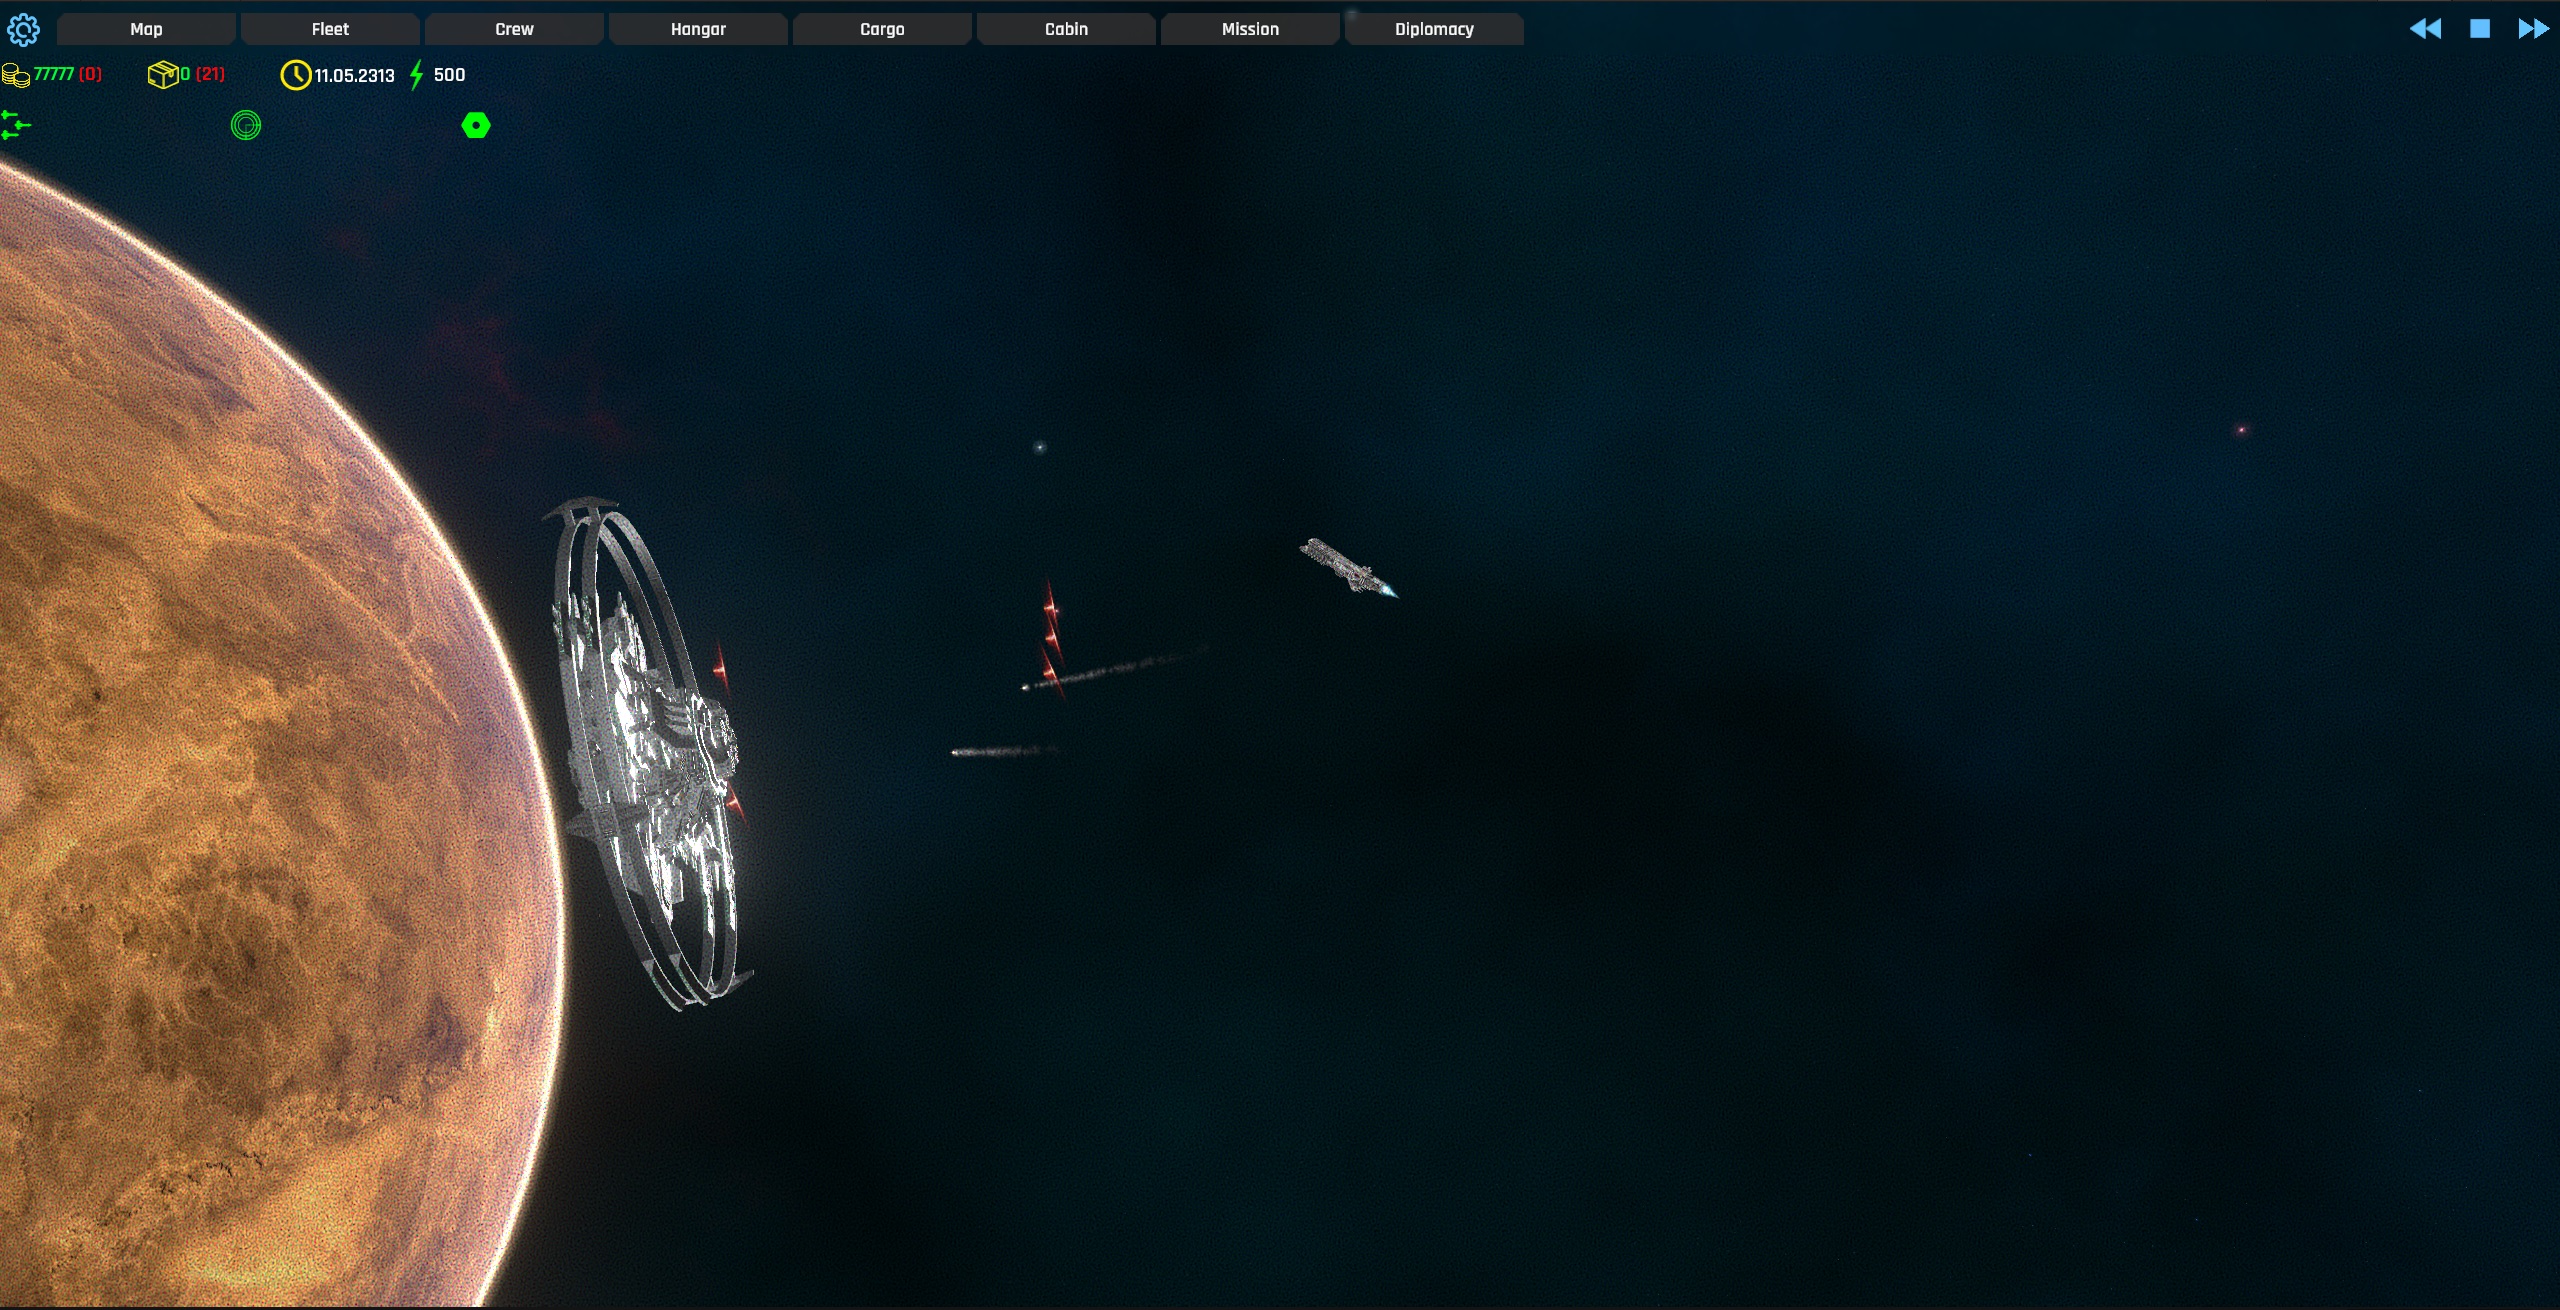 Our fleet consisting only of a lone spaceship is fighting its way through a hostile Space Station.